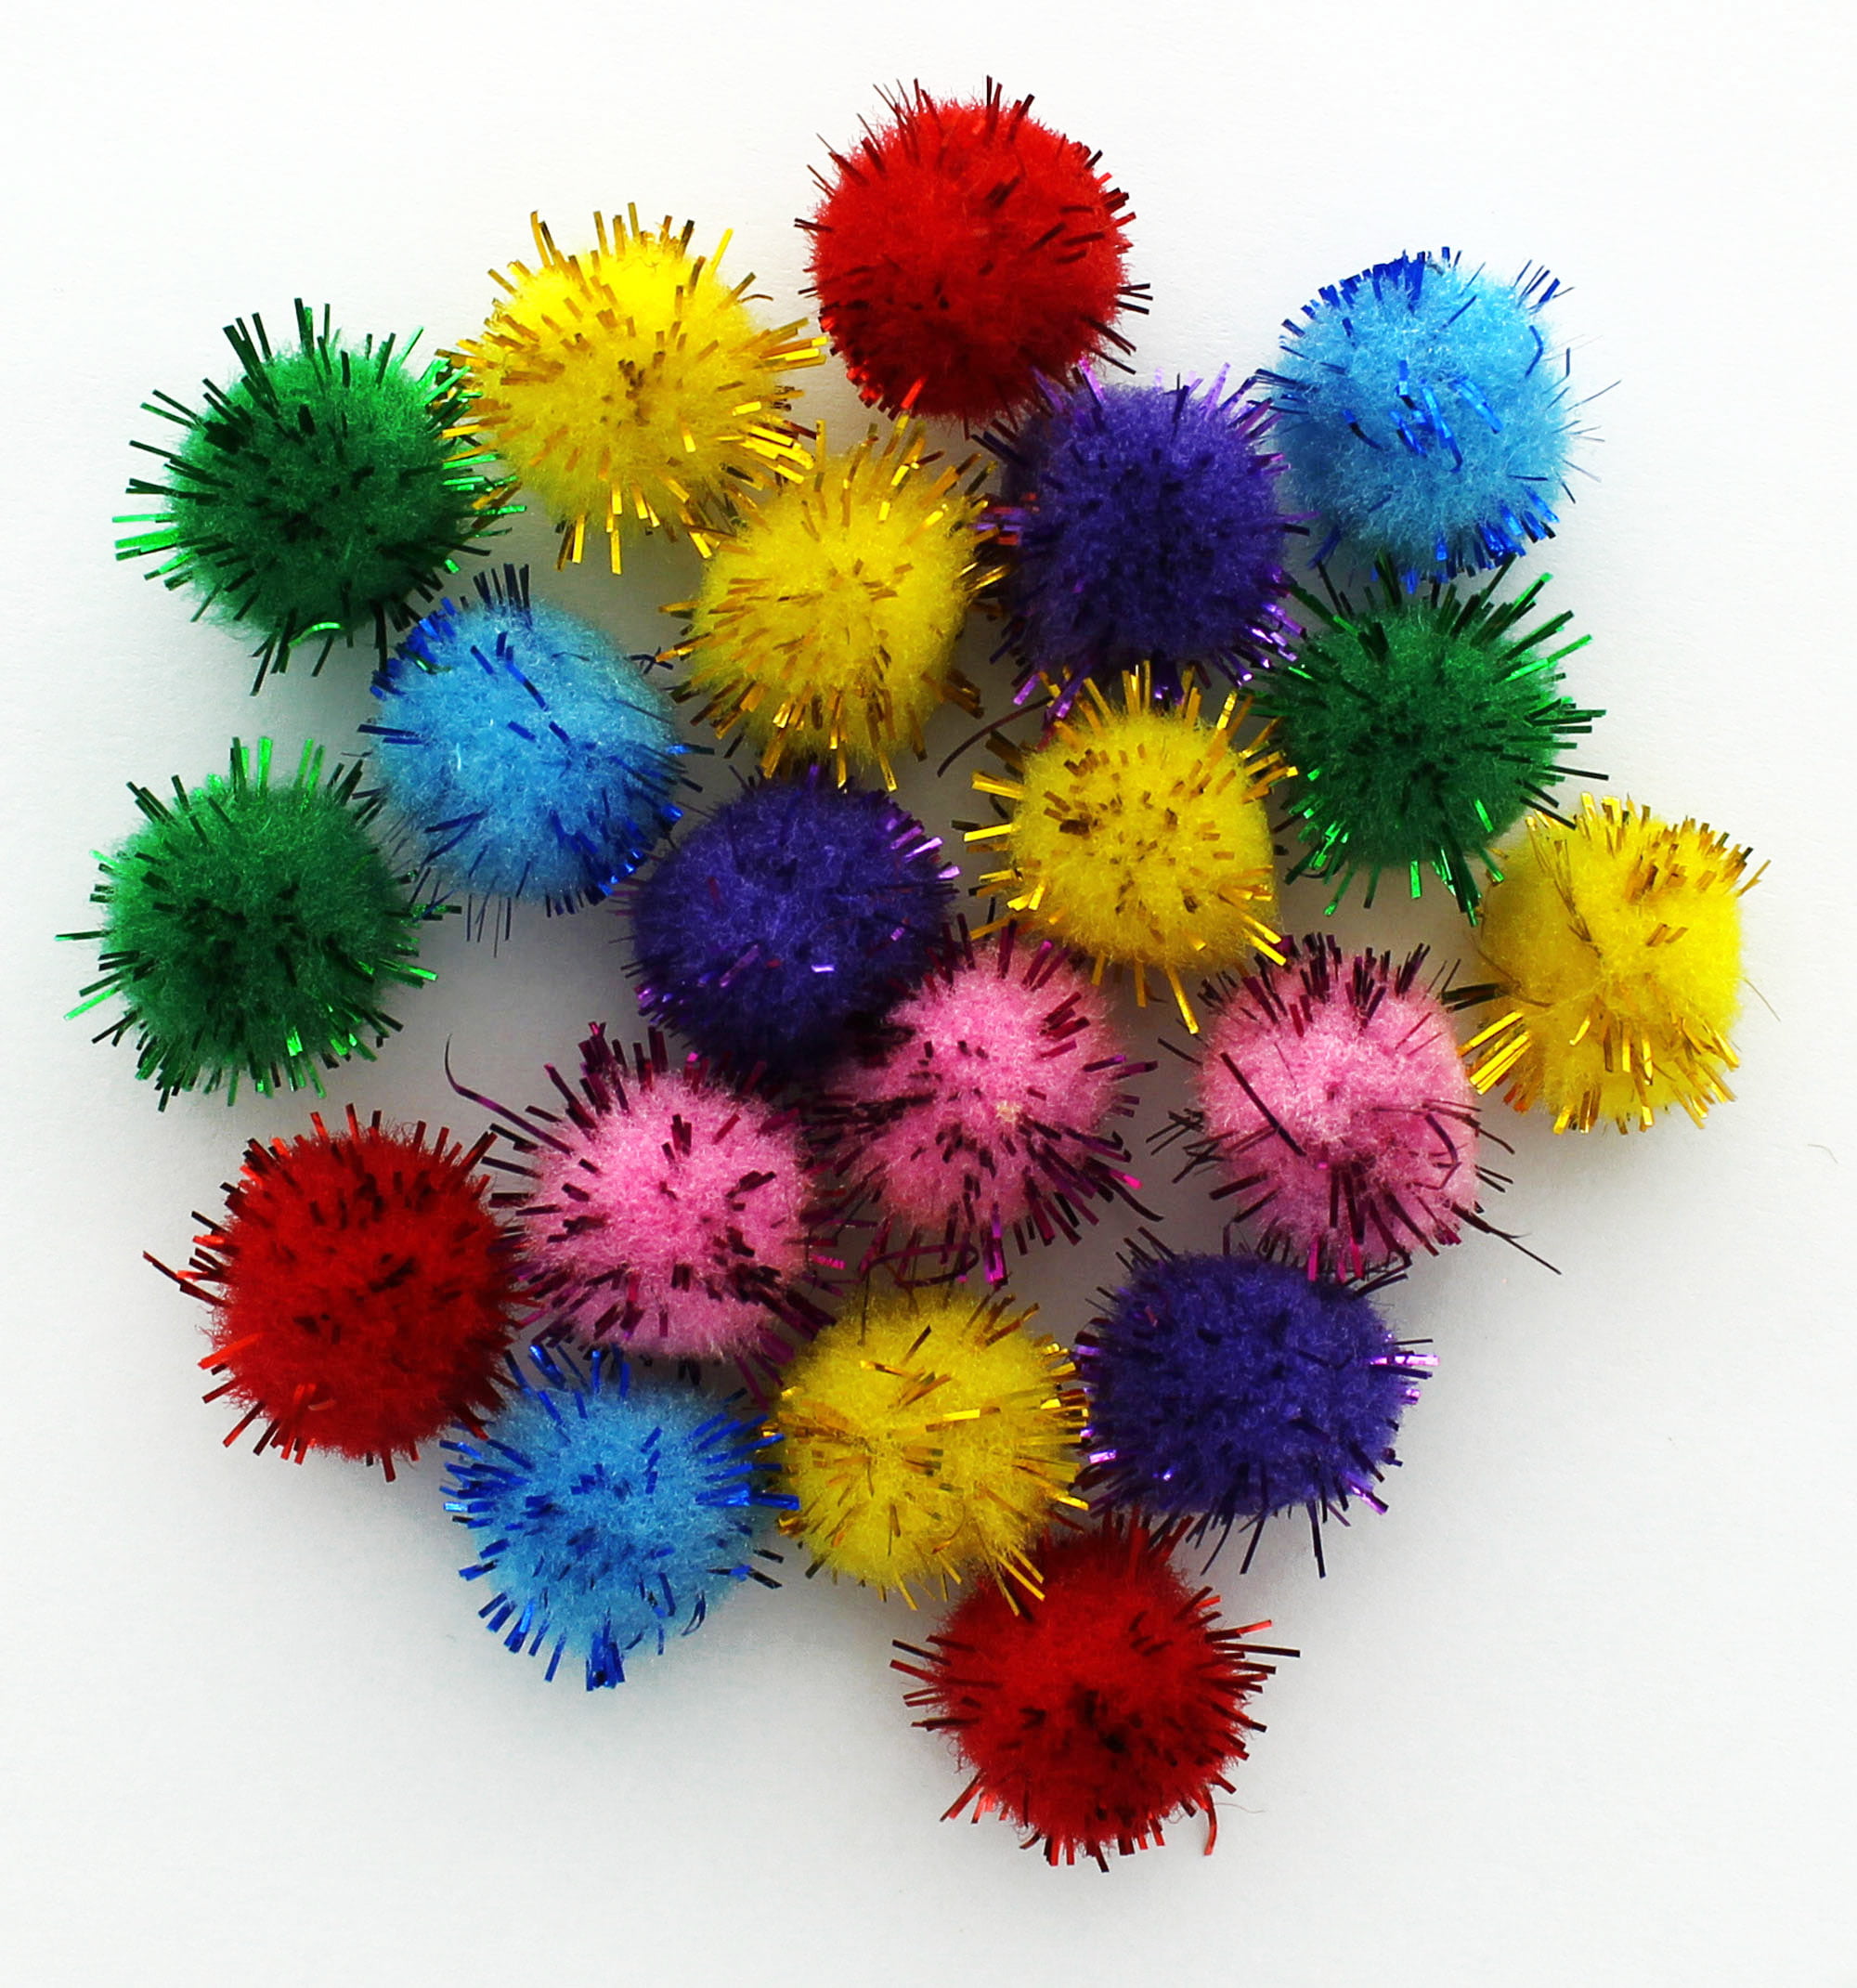 Essentials by Leisure Arts Pom Poms - Glitter Multi-colored - 1/2 - 20  piece pom poms arts and crafts - colored pompoms for crafts - craft pom  poms - puff balls for crafts 